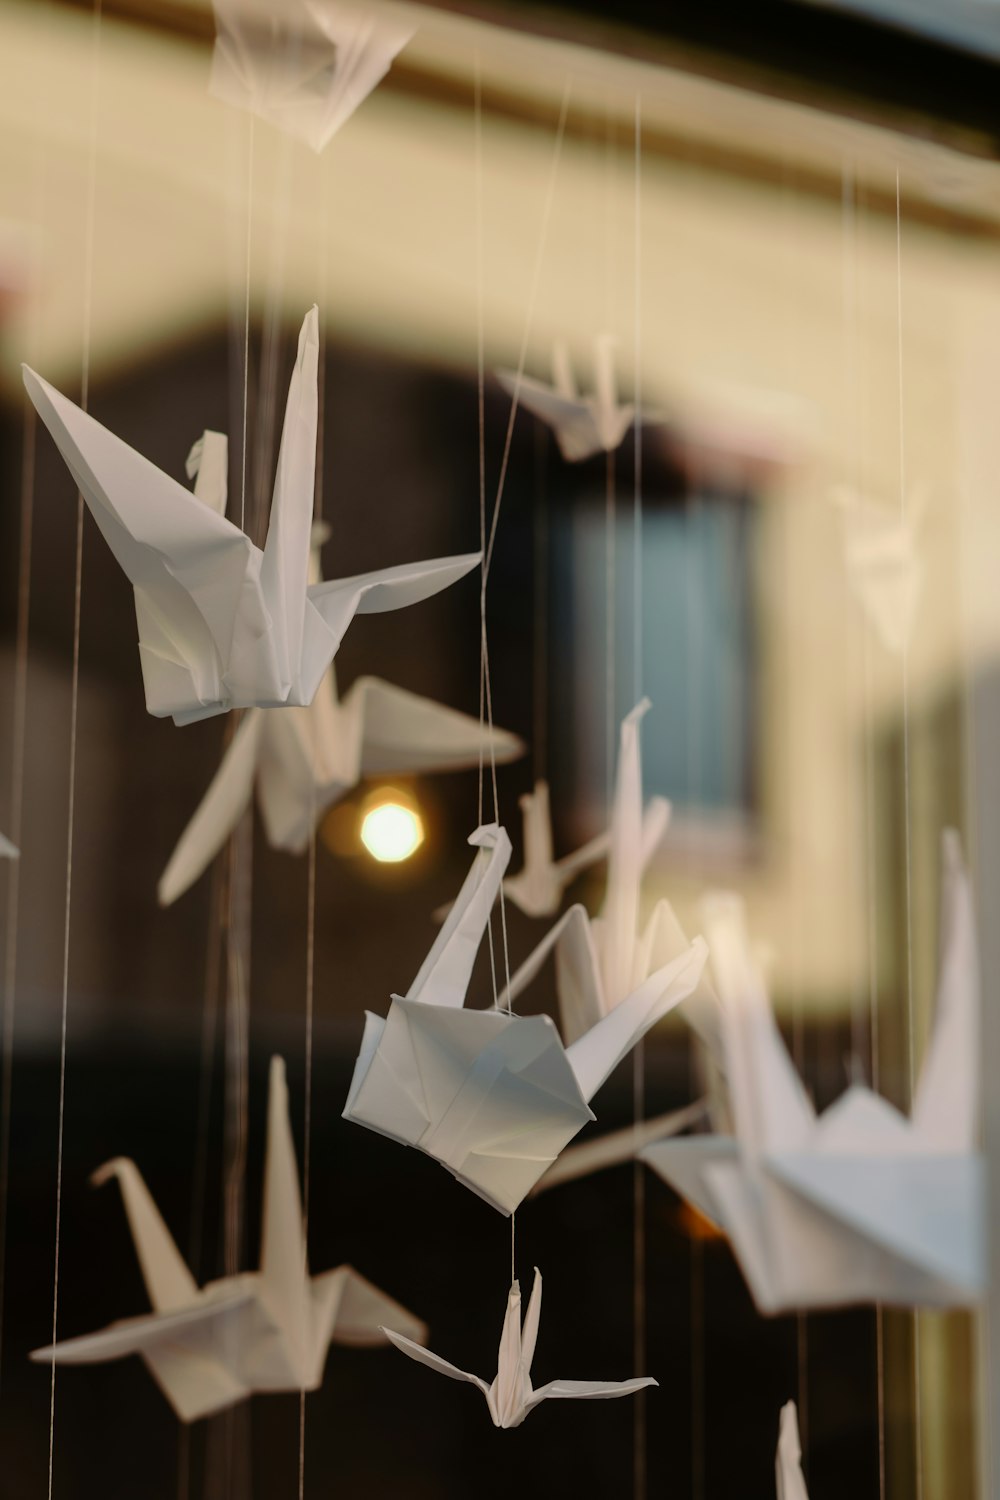 a group of paper airplanes